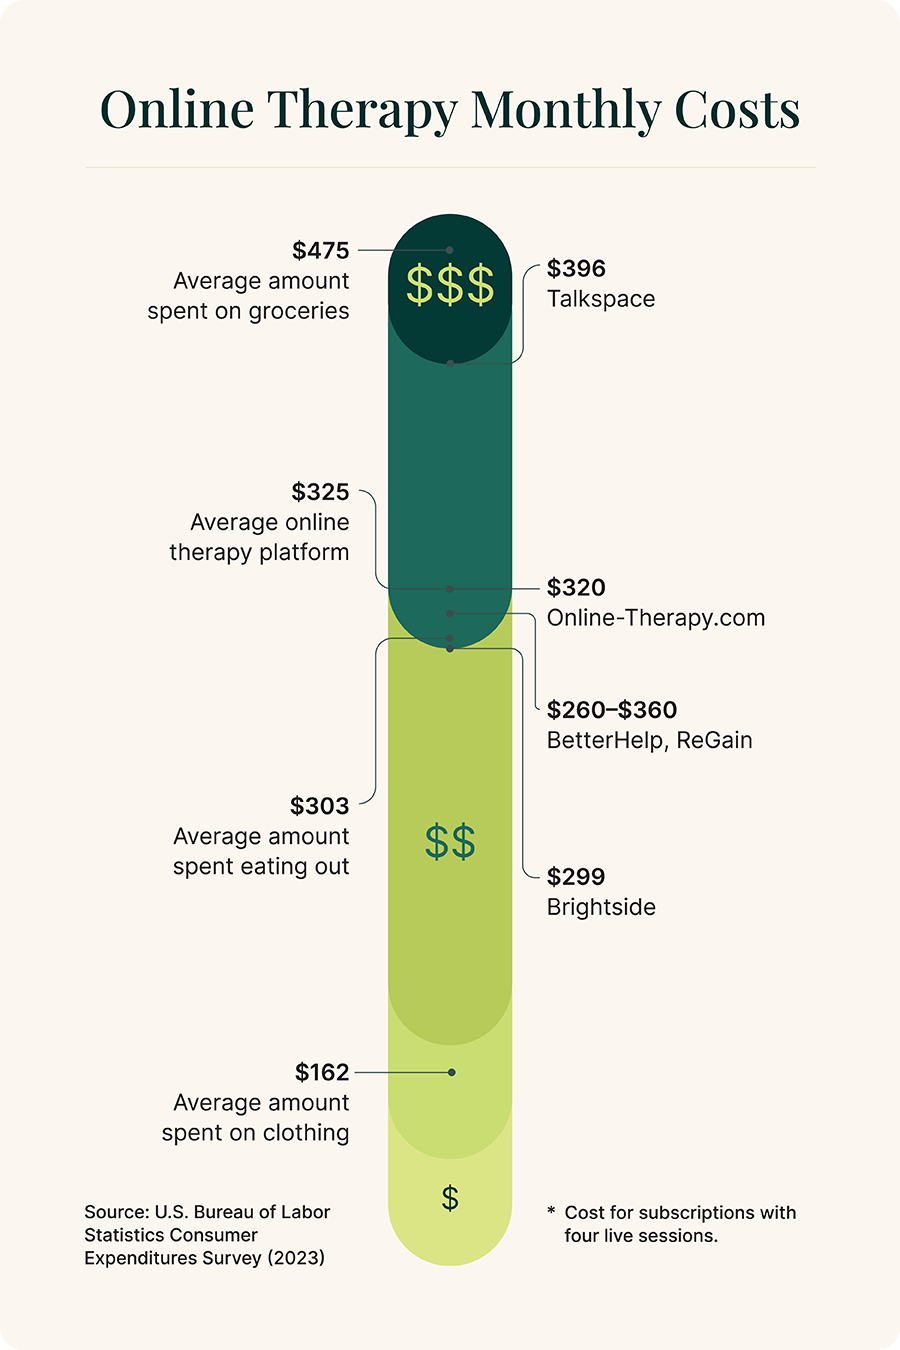 monthly cost of online therapy platforms with weekly sessions compared to average monthly costs of groceries, clothing, and eating out